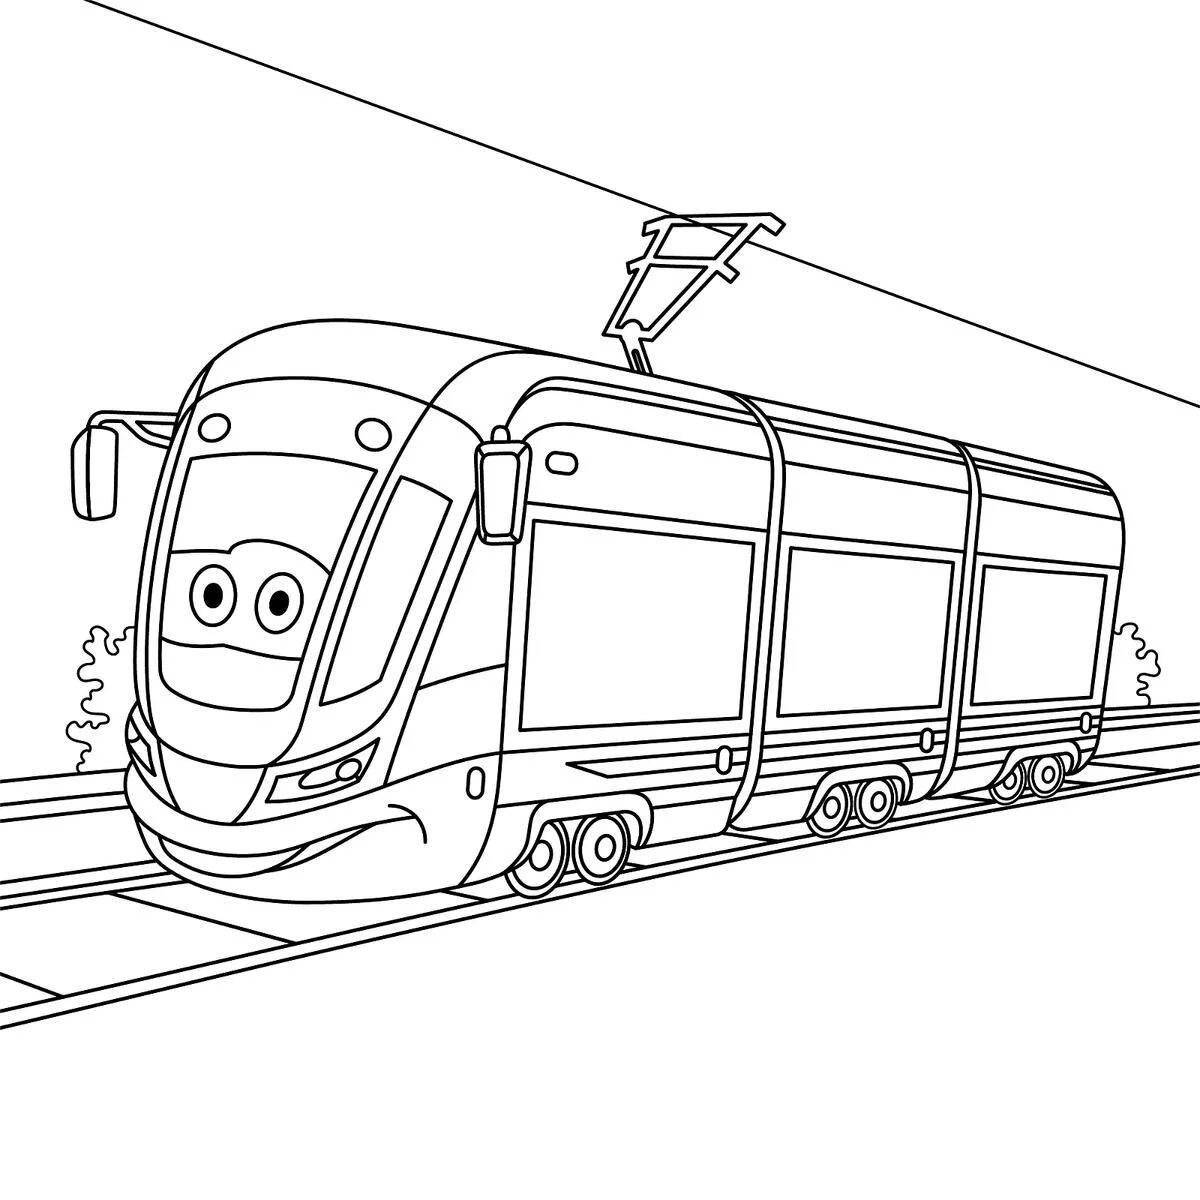 Luminous tram coloring page for kids